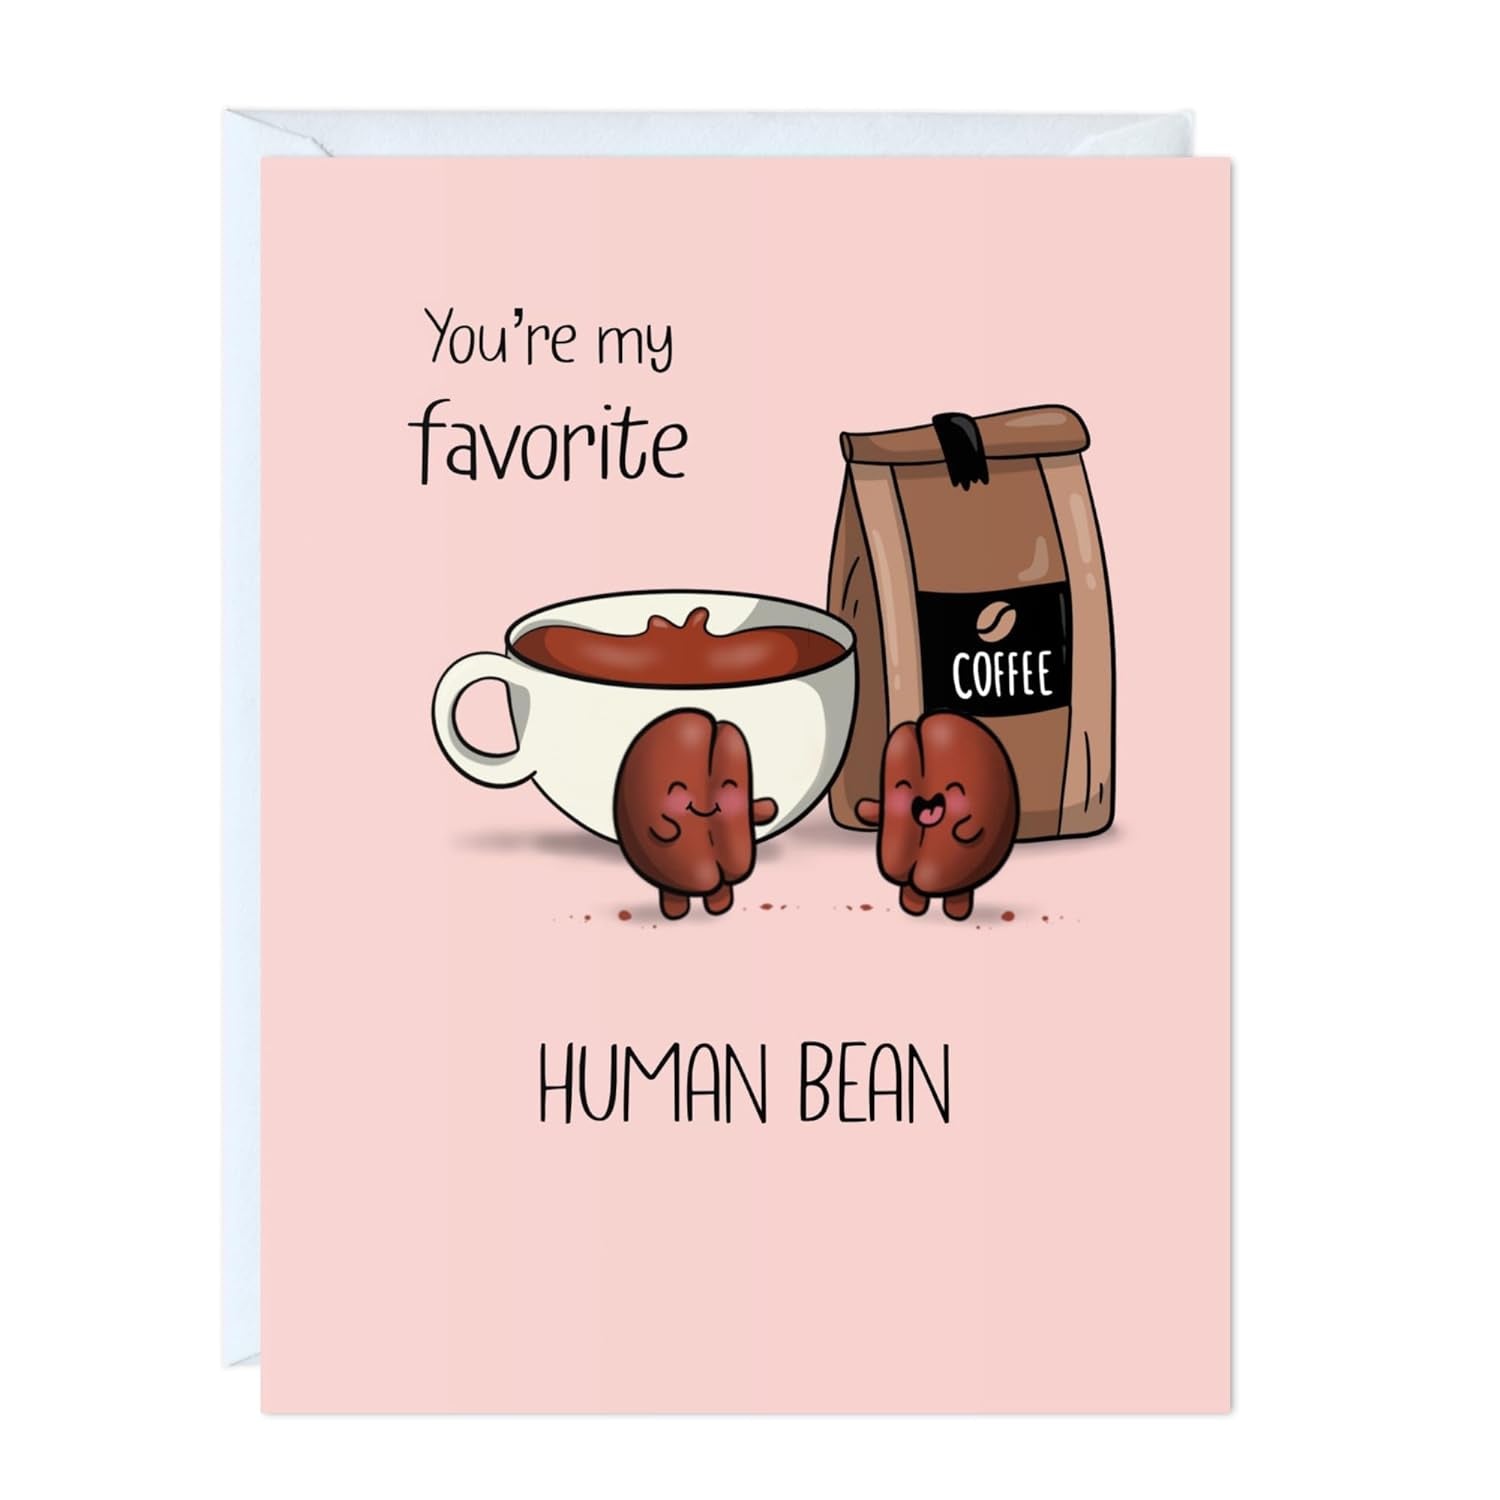 Coffee Anniversary Birthday Card, Father'S Day Card, for Her Him/Funny Card for Boyfriend Girlfriend/Husband Wife/Handmade Greeting Card (You'Re My Favorite Human Bean)